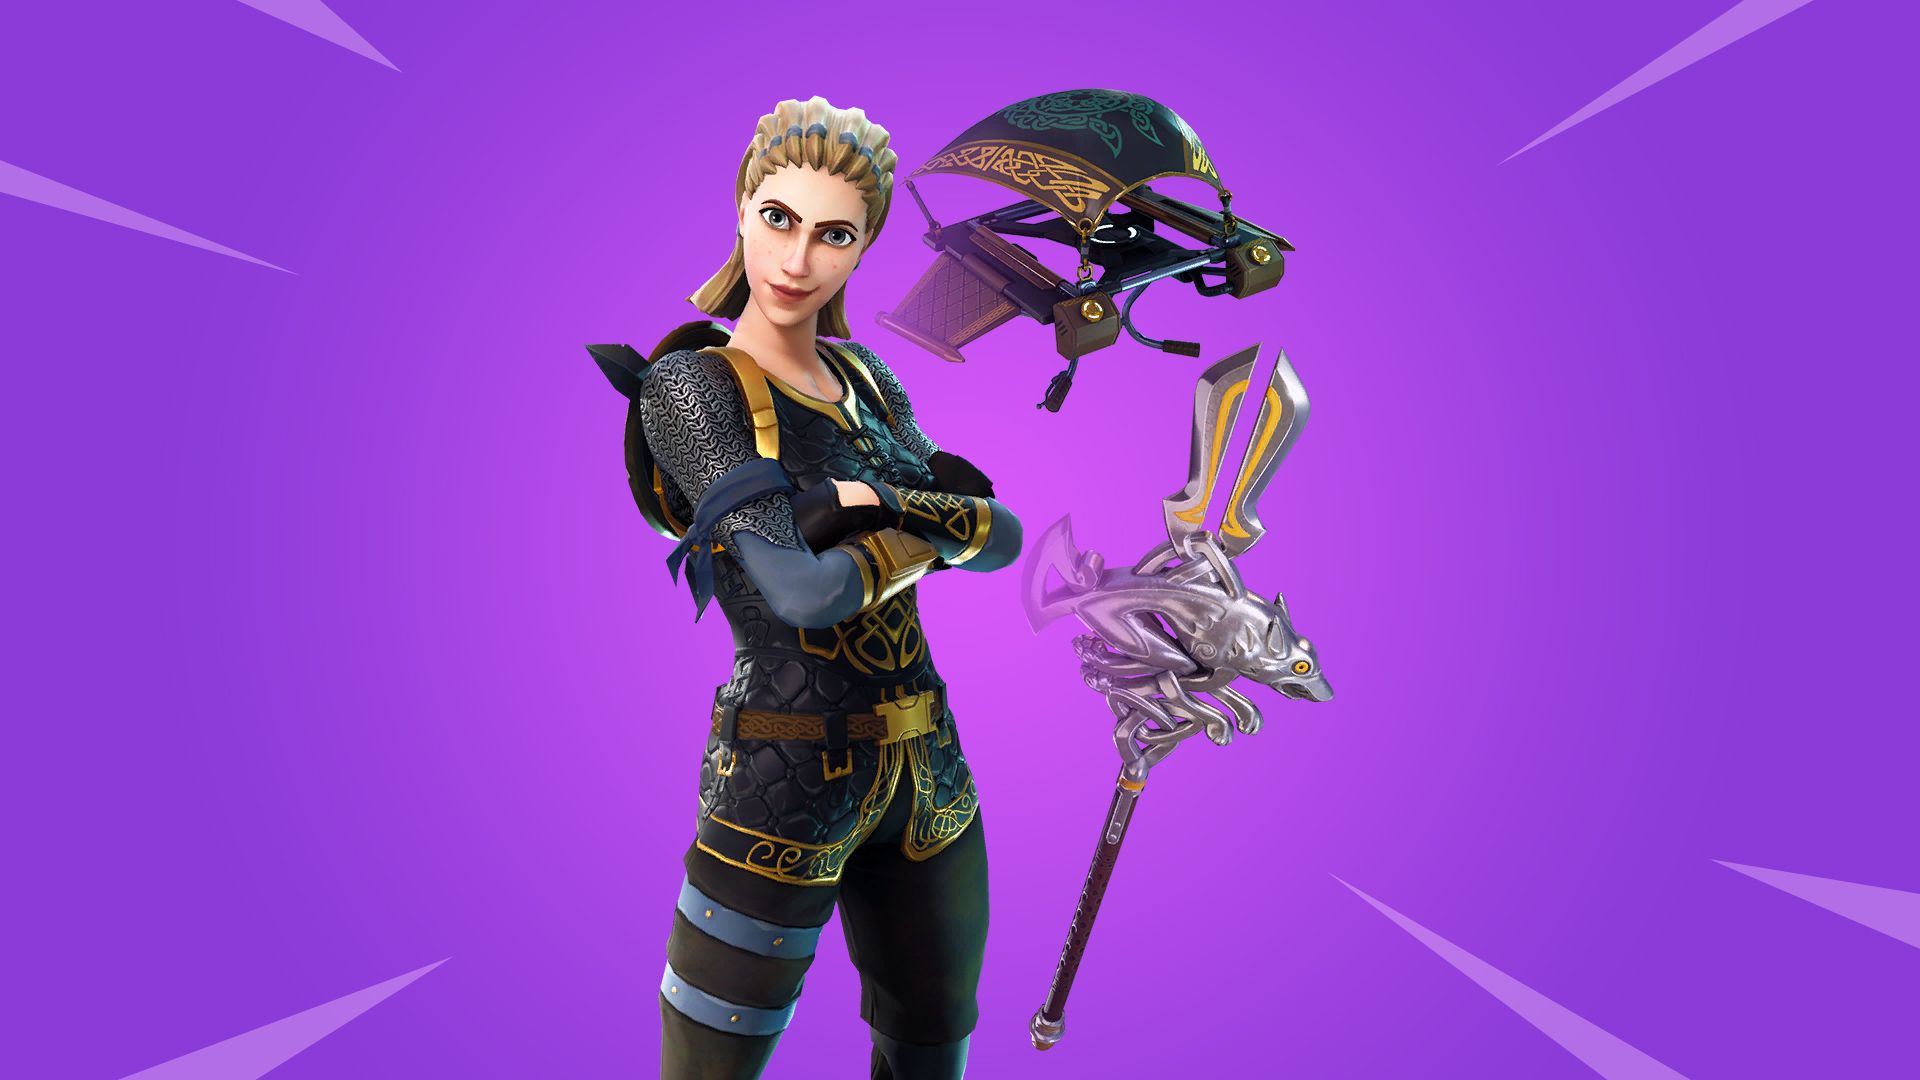 [Updated] Bundles have been temporarily removed from Fortnite's item shop